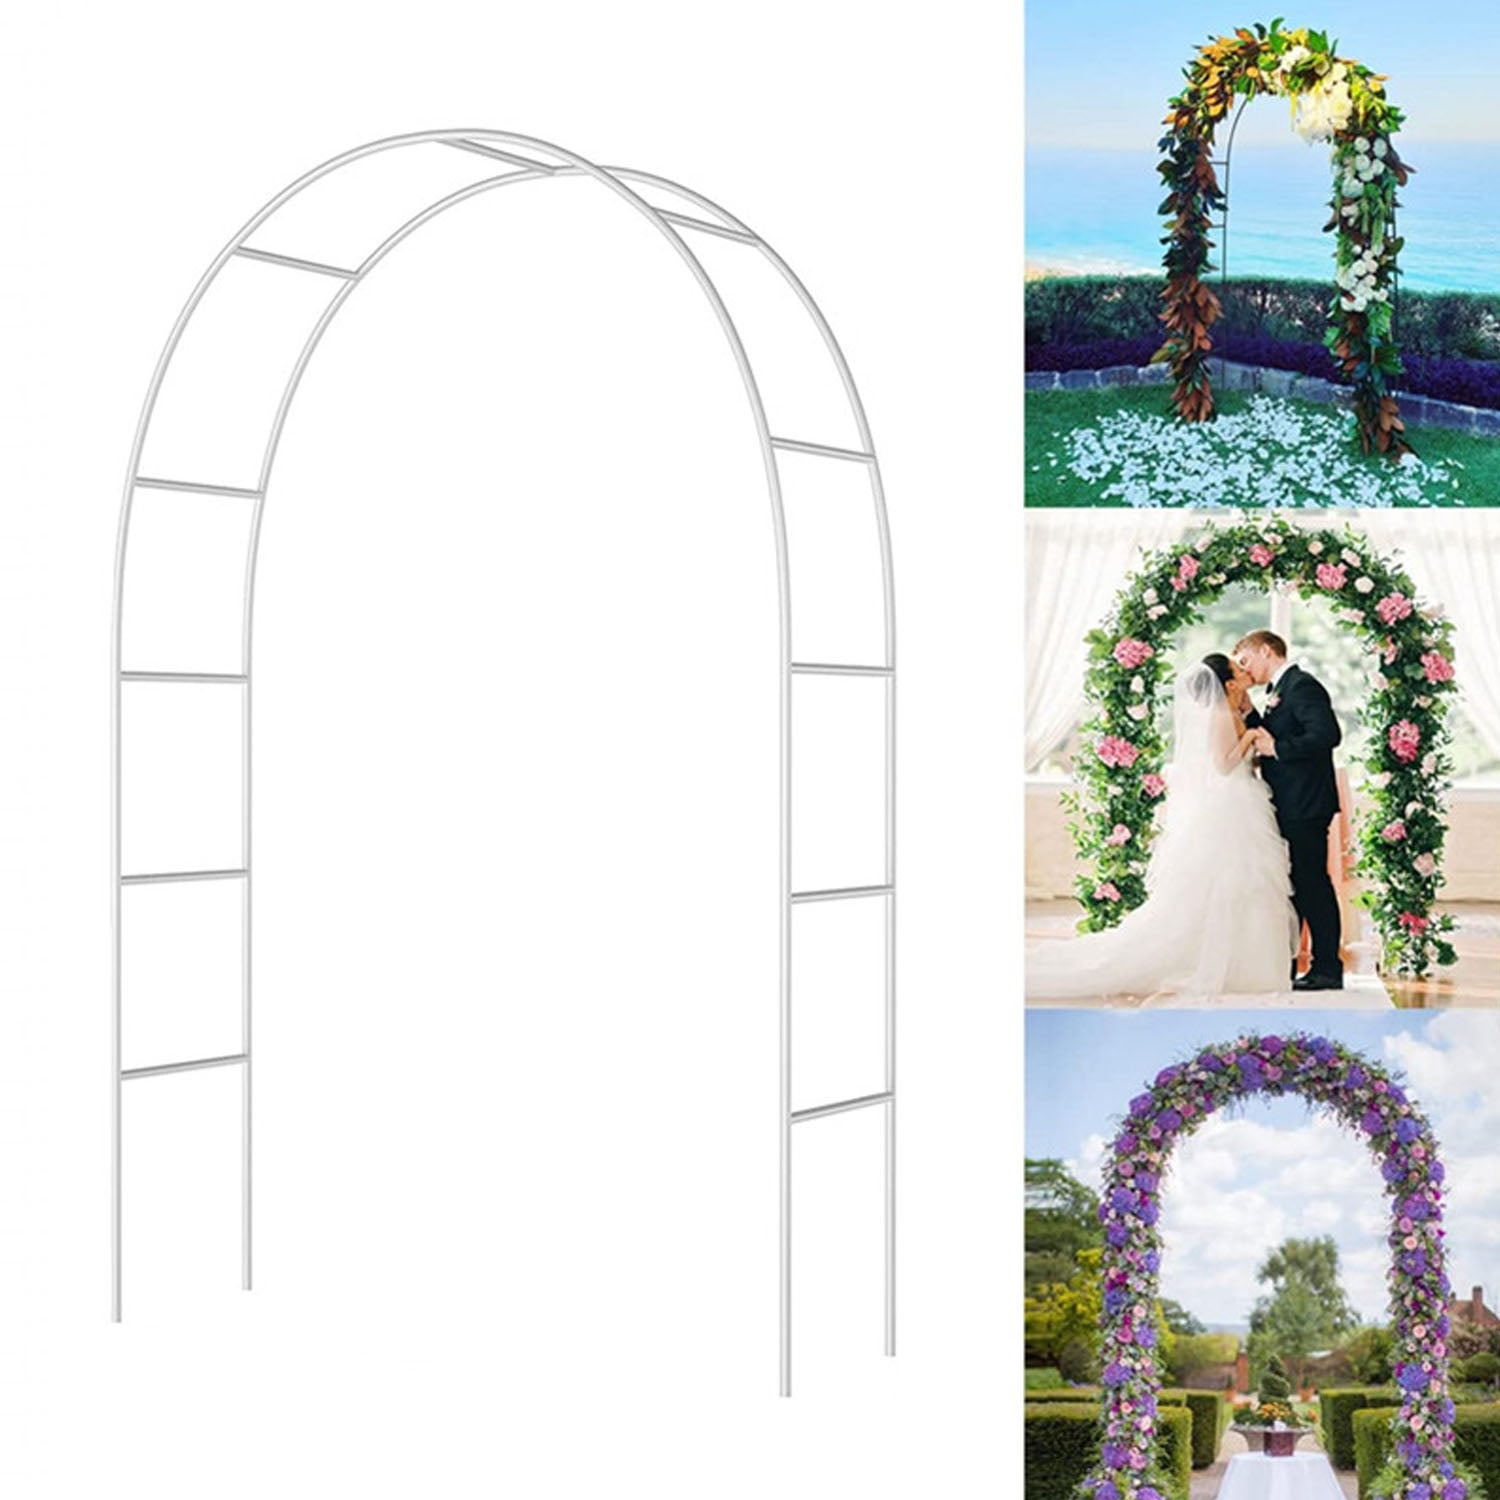 Pack of 3 7.5 Ft White Metal Arch Wedding Garden Bridal Party Decoration Arbor 